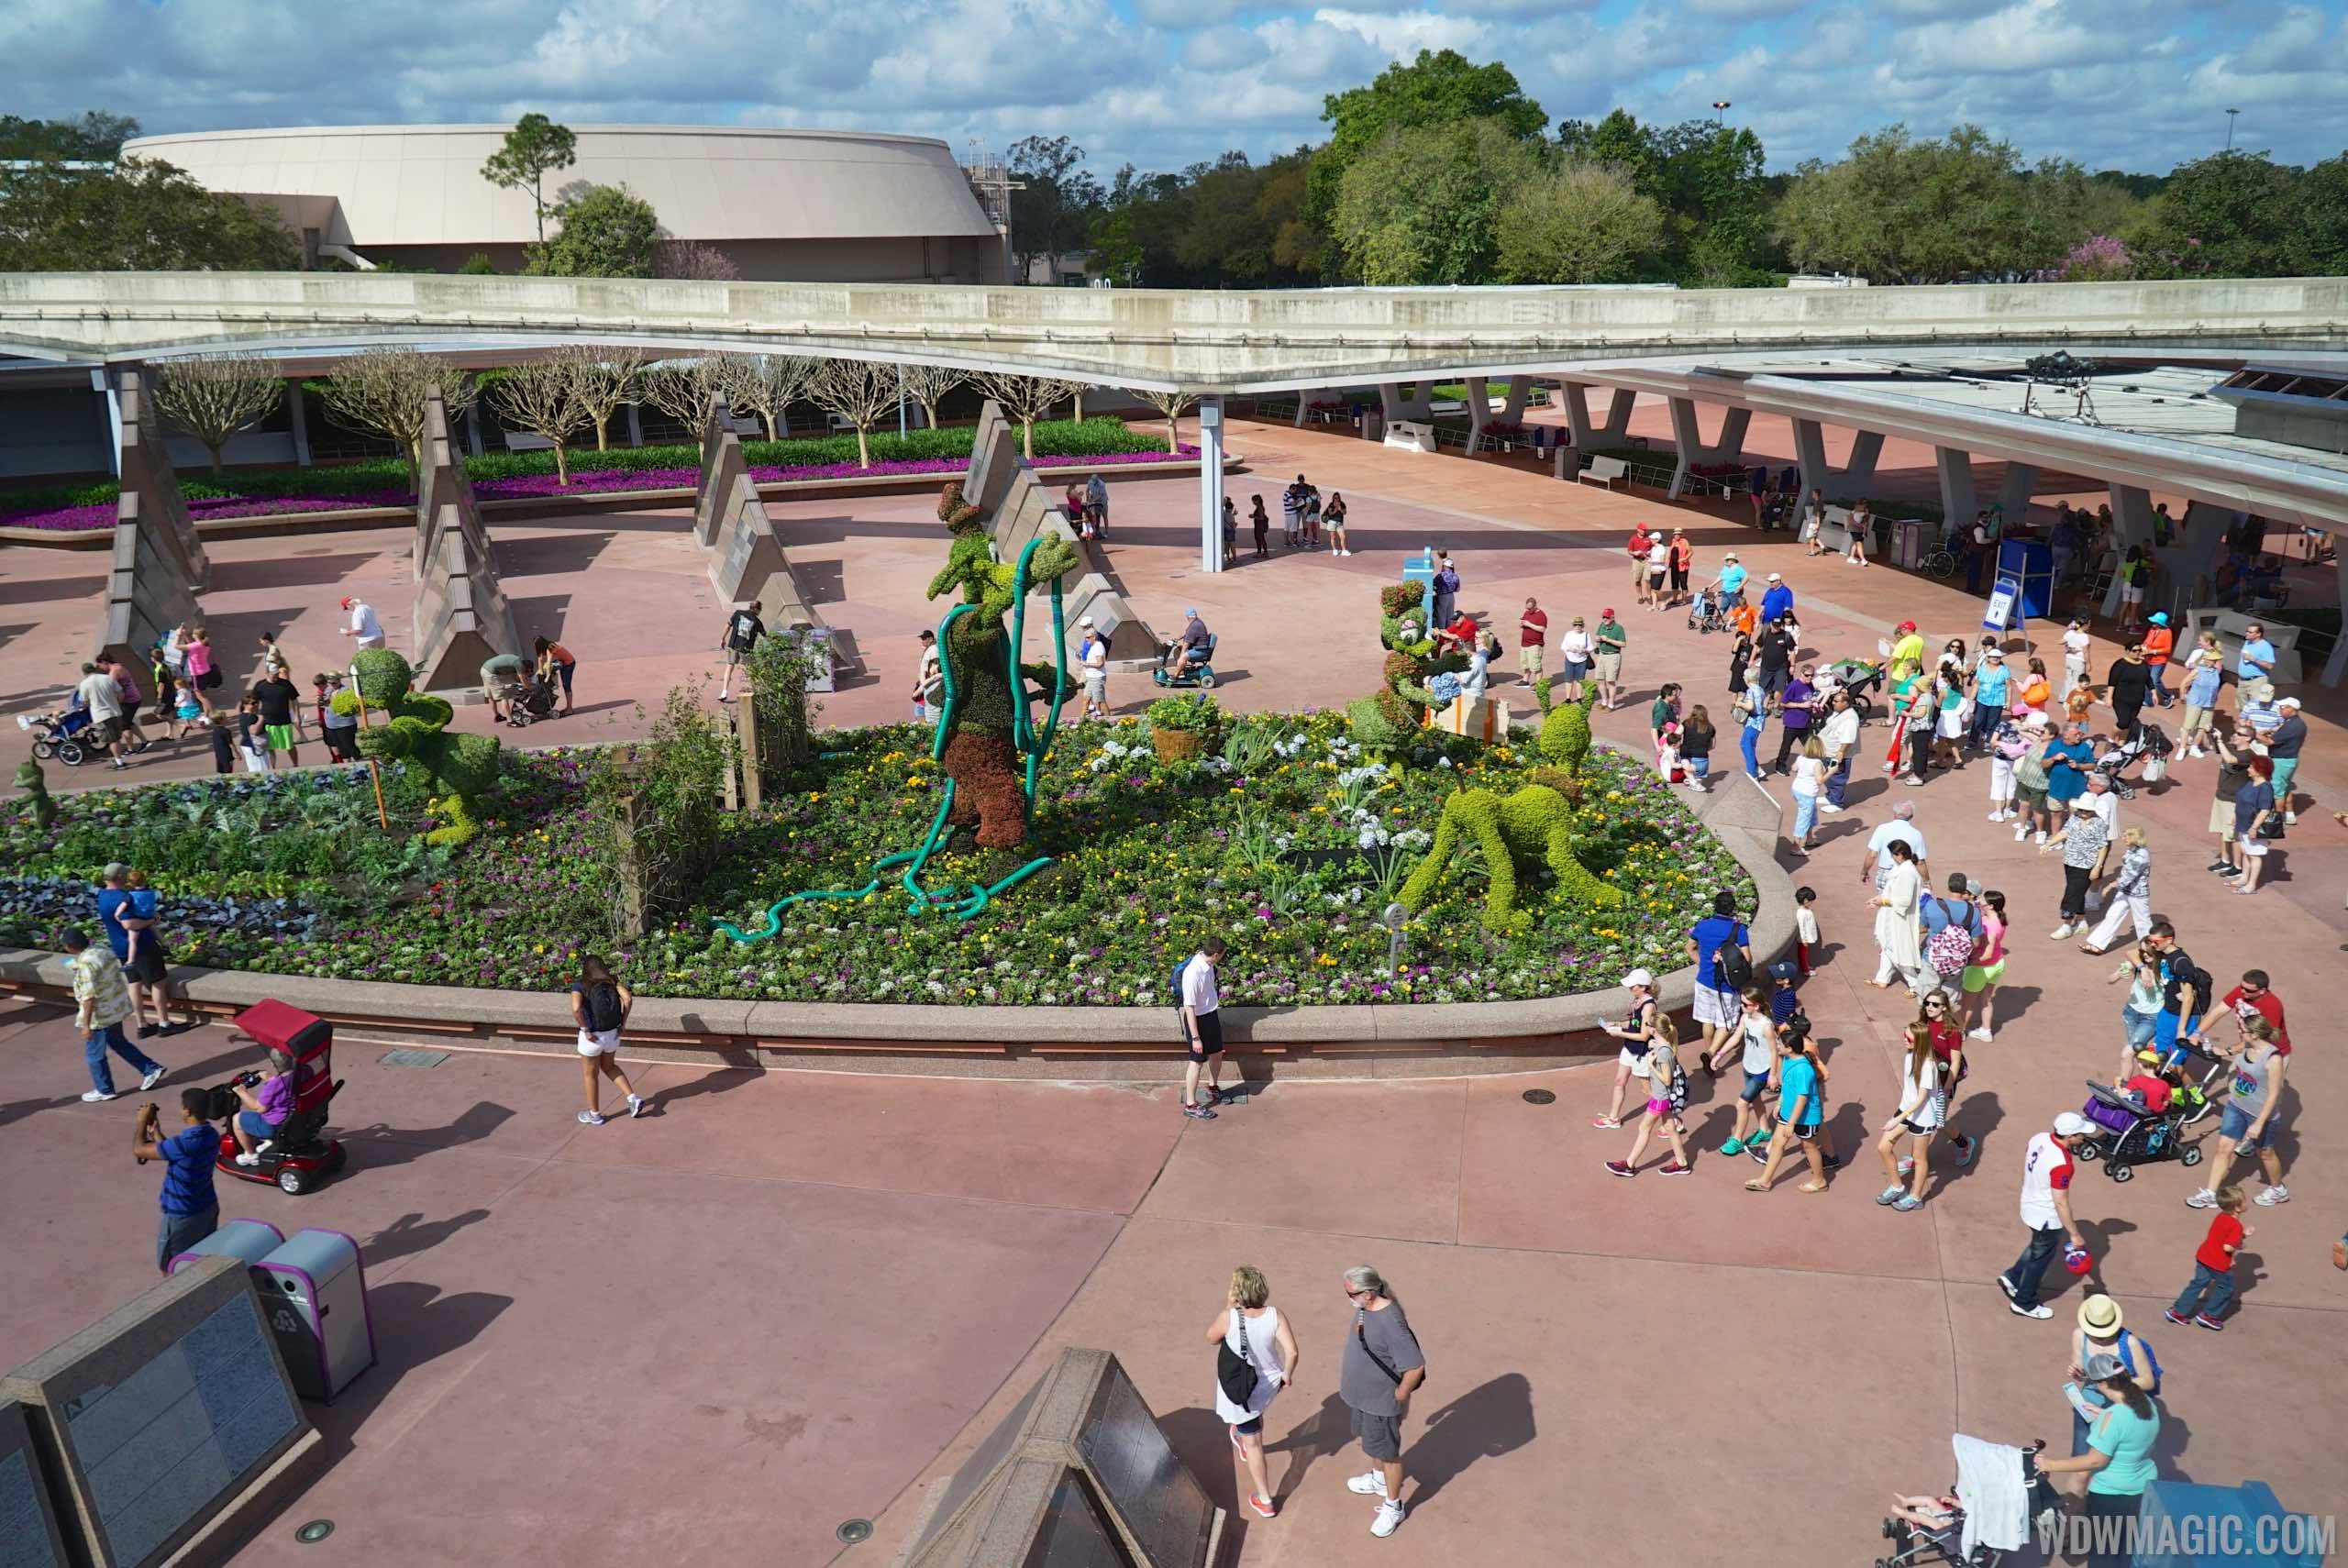 2015 Epcot Flower and Garden Festival - Main entrance topiary